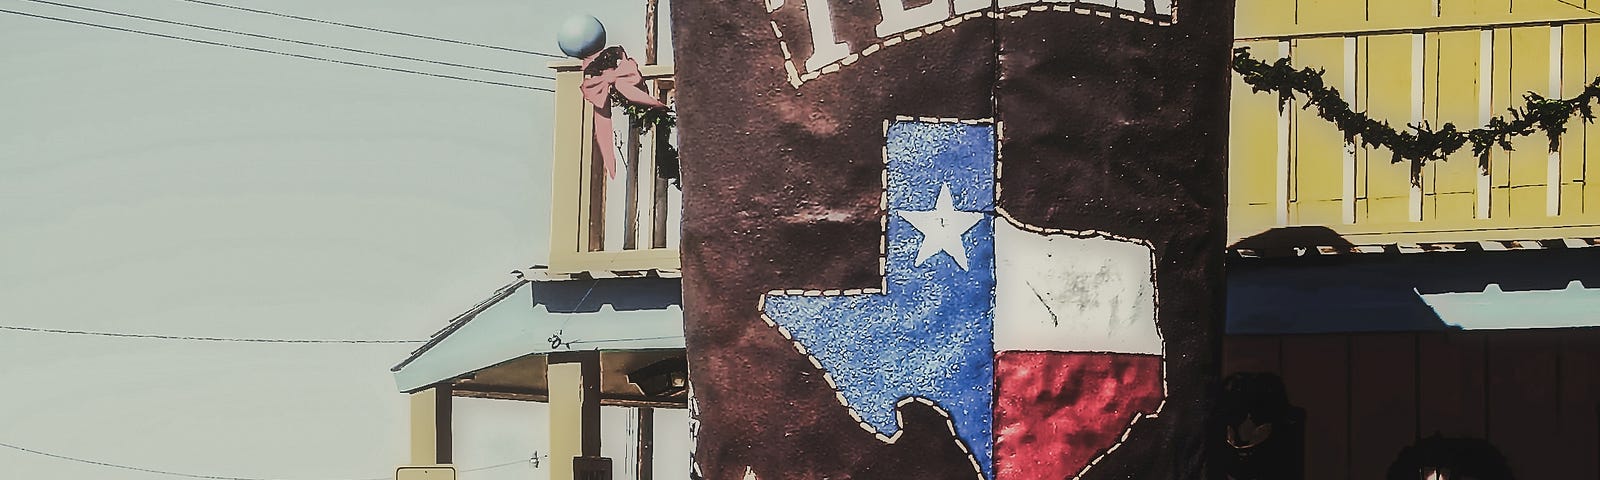 Enormous “Big Texan” cowboy boot embellished with the Texas Flag inside the shape of Texas